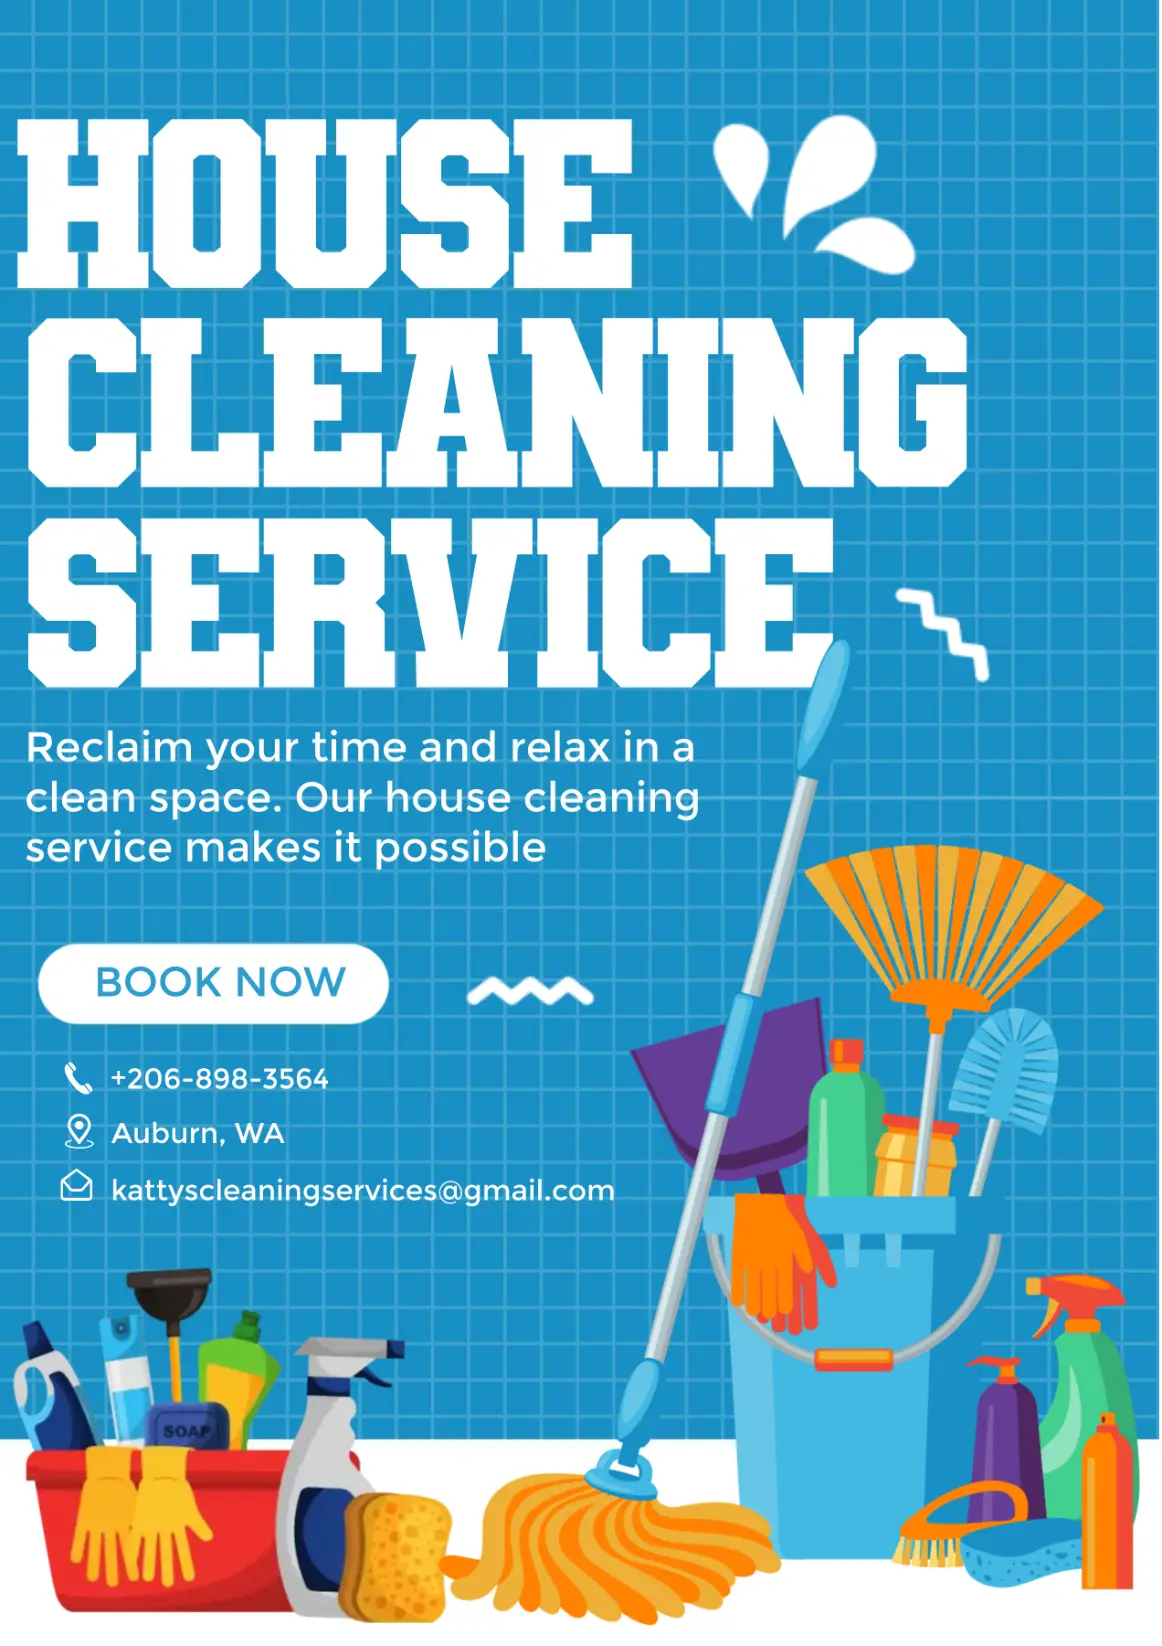 House Cleaning Service ads